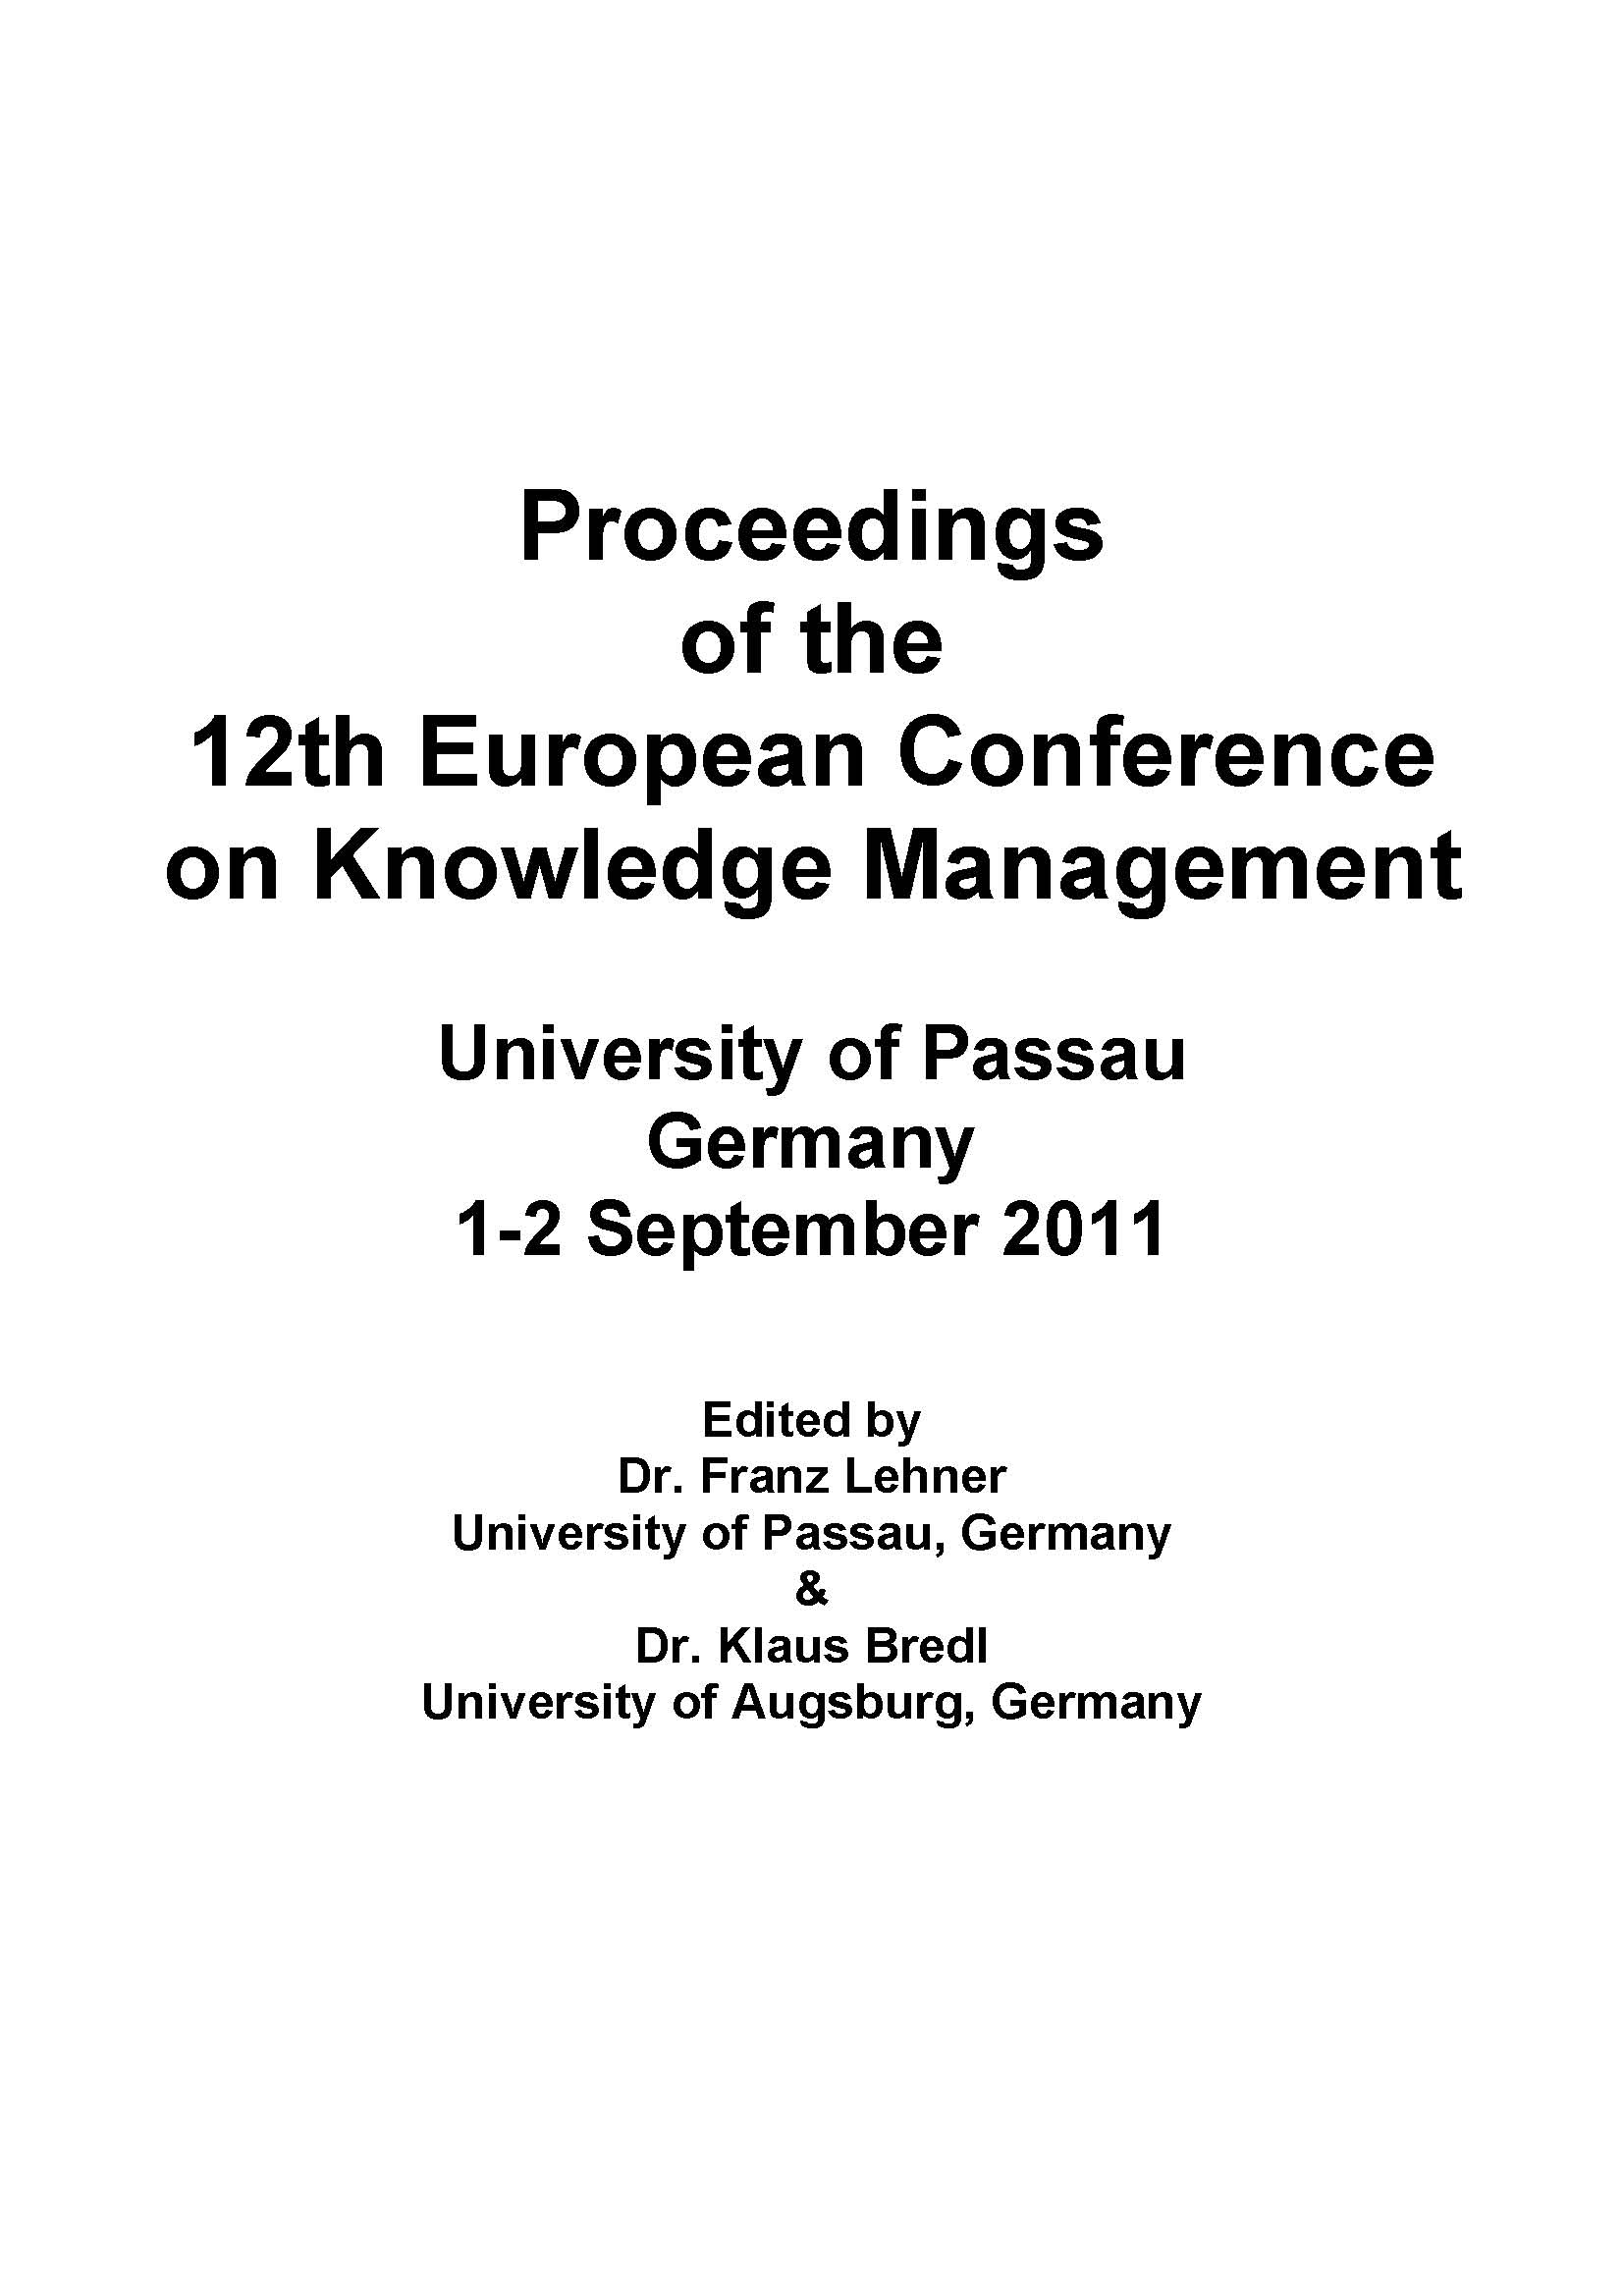 Proceedings of the 12th European Conference on Knowledge Management University of Passau Germany, 1-2 September 2011